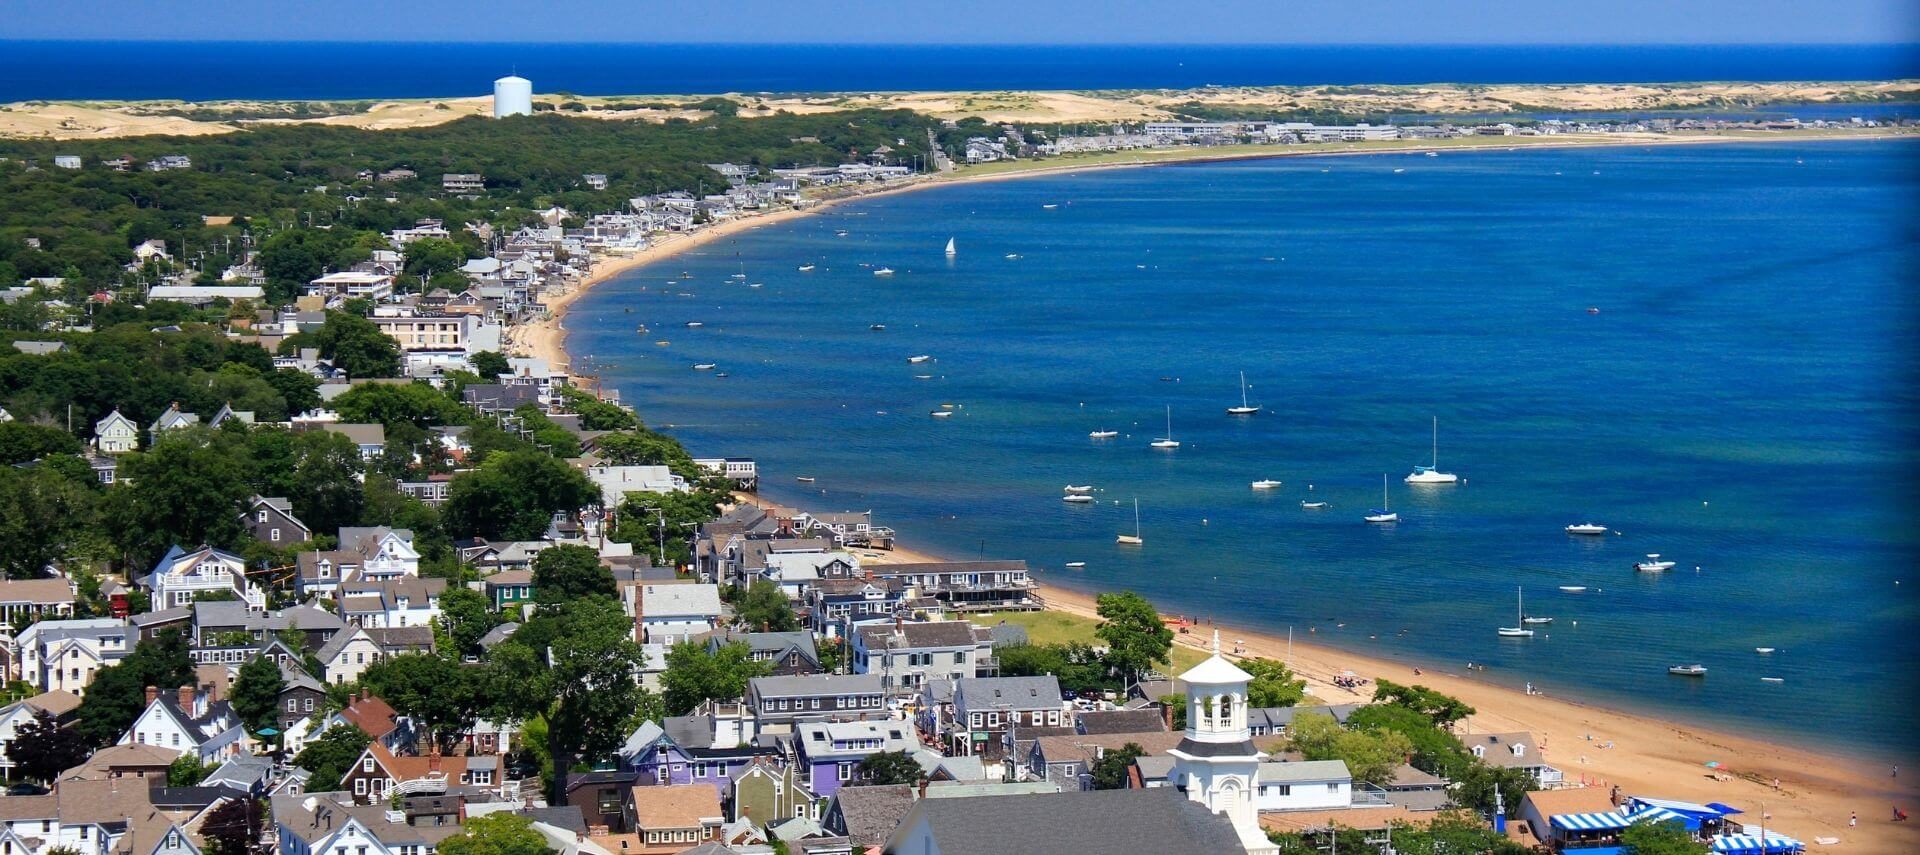 Aerial view of Provincetown, MA with boats on water with houses along beach